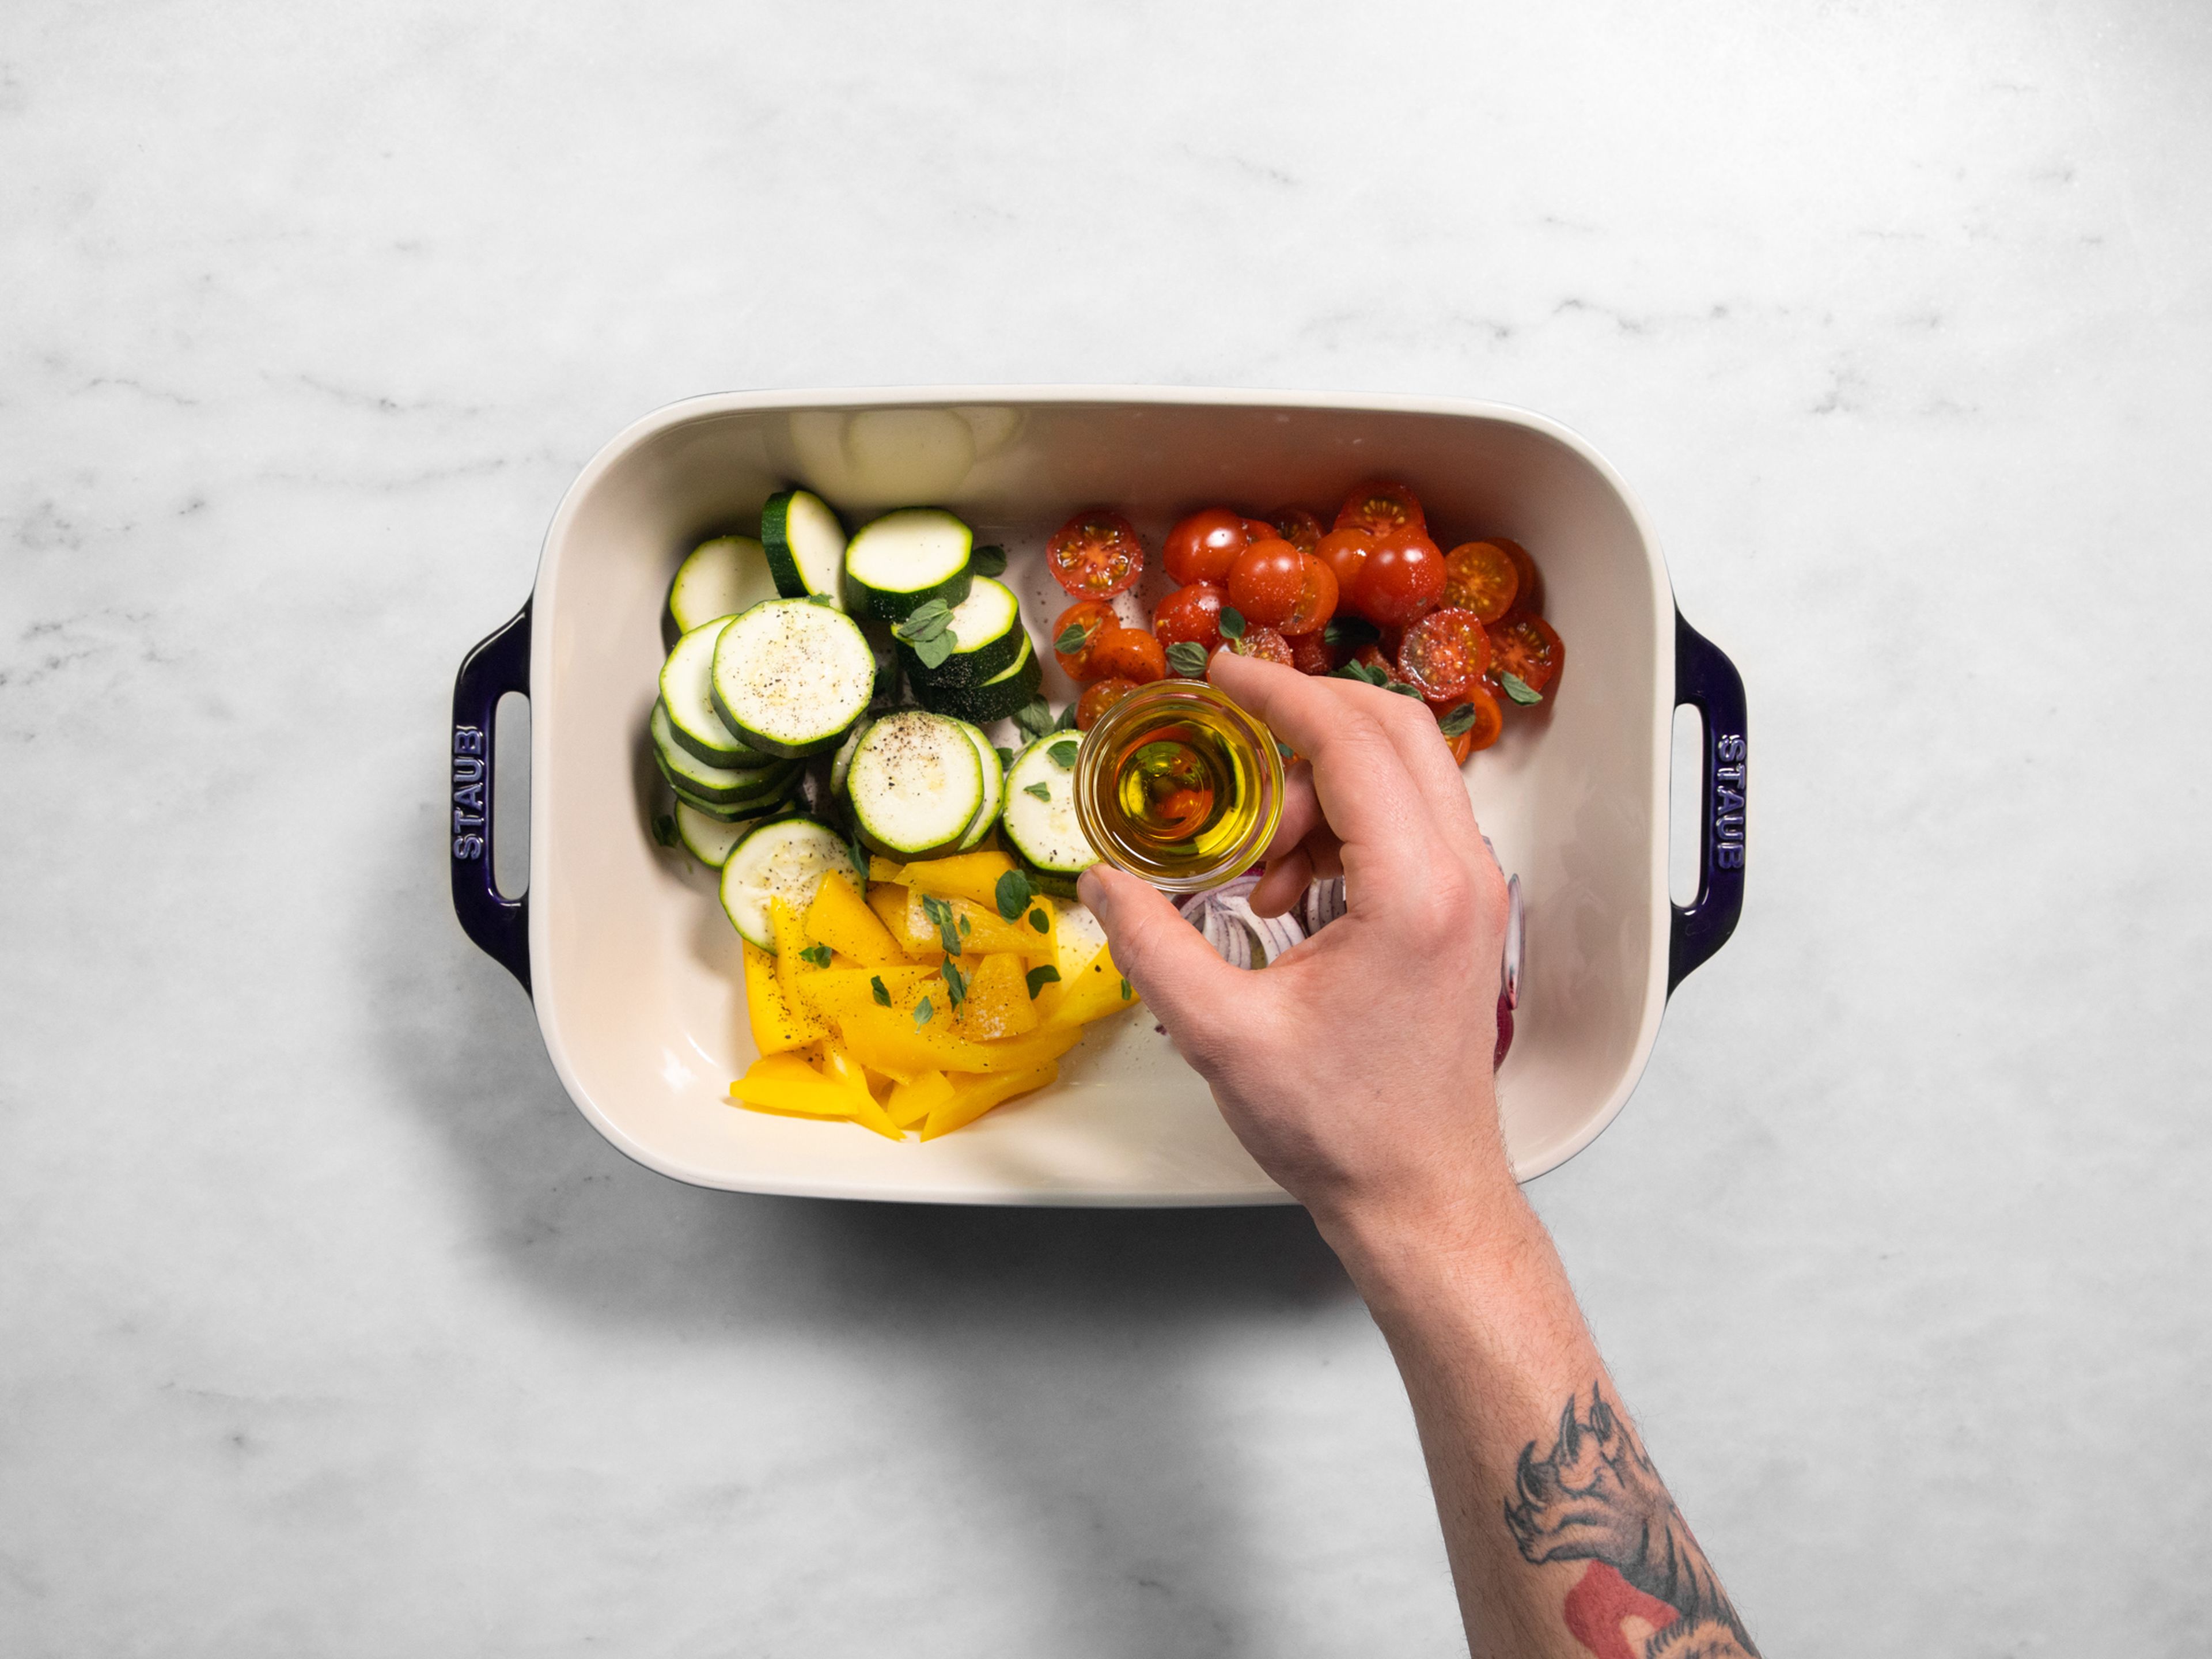 Place vegetables in a baking dish and season with oregano, salt, and pepper. Drizzle olive oil over the top and toss to coat. Transfer to the oven and roast at 180°C/360°F for approx. 15 min.